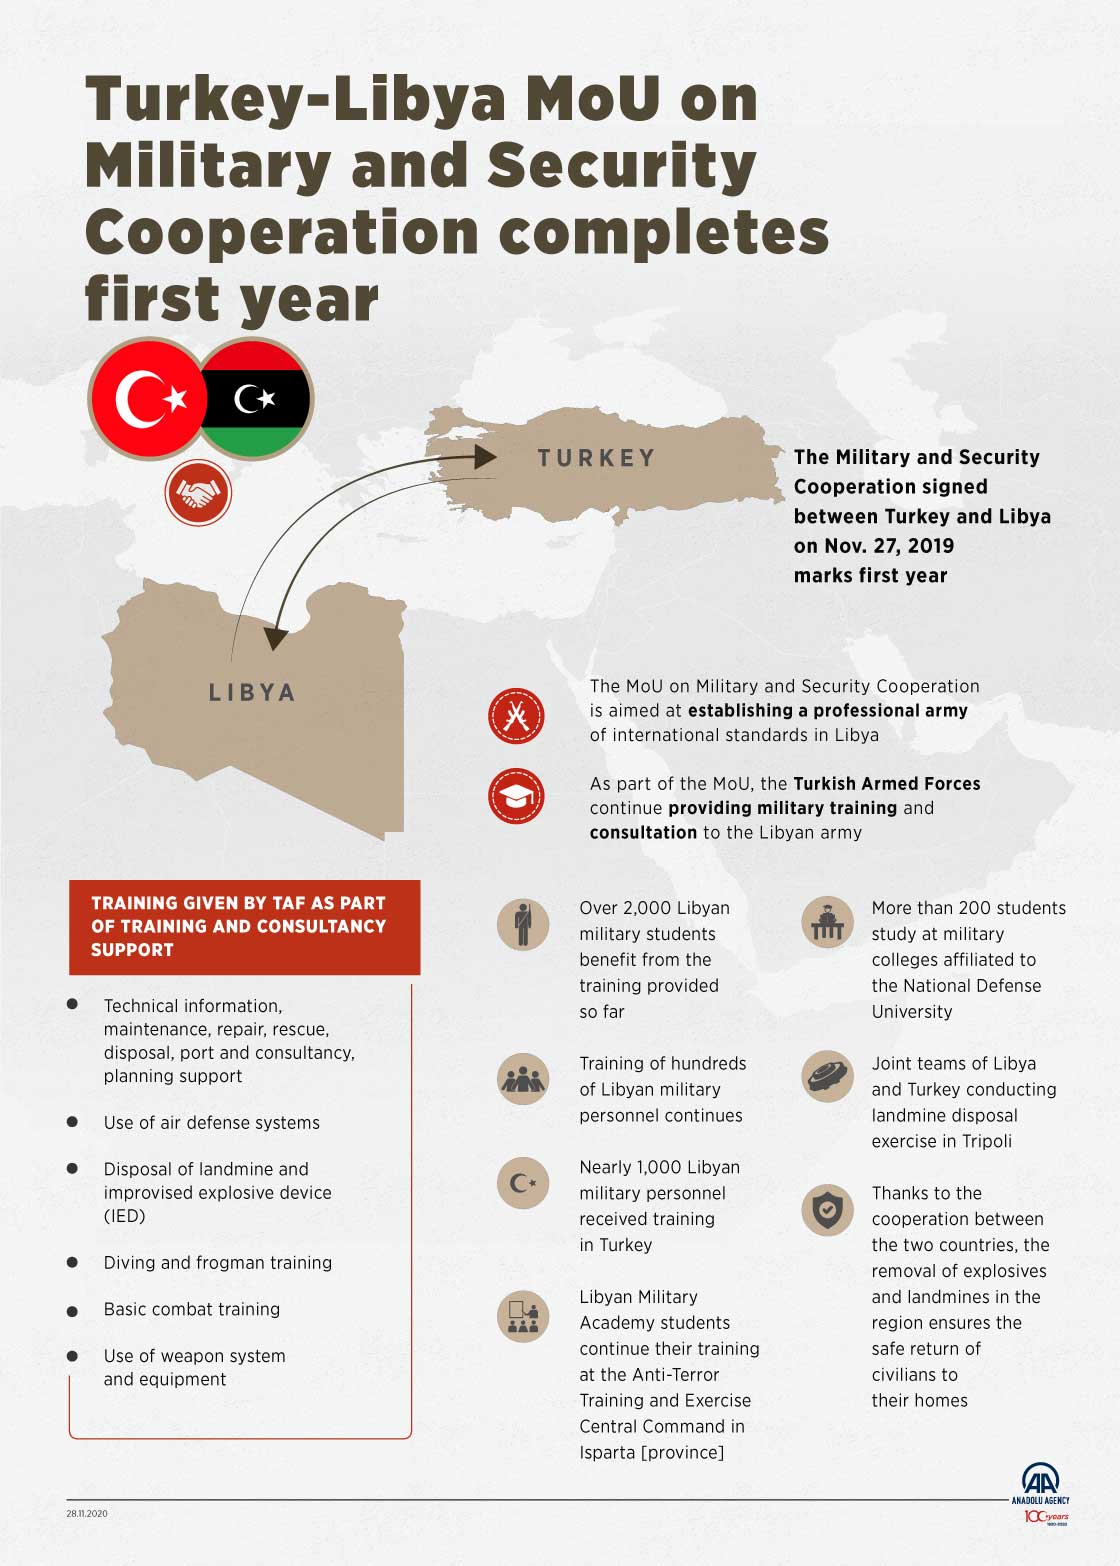 Turkey-Libya MoU on Military and Security Cooperation completes first year